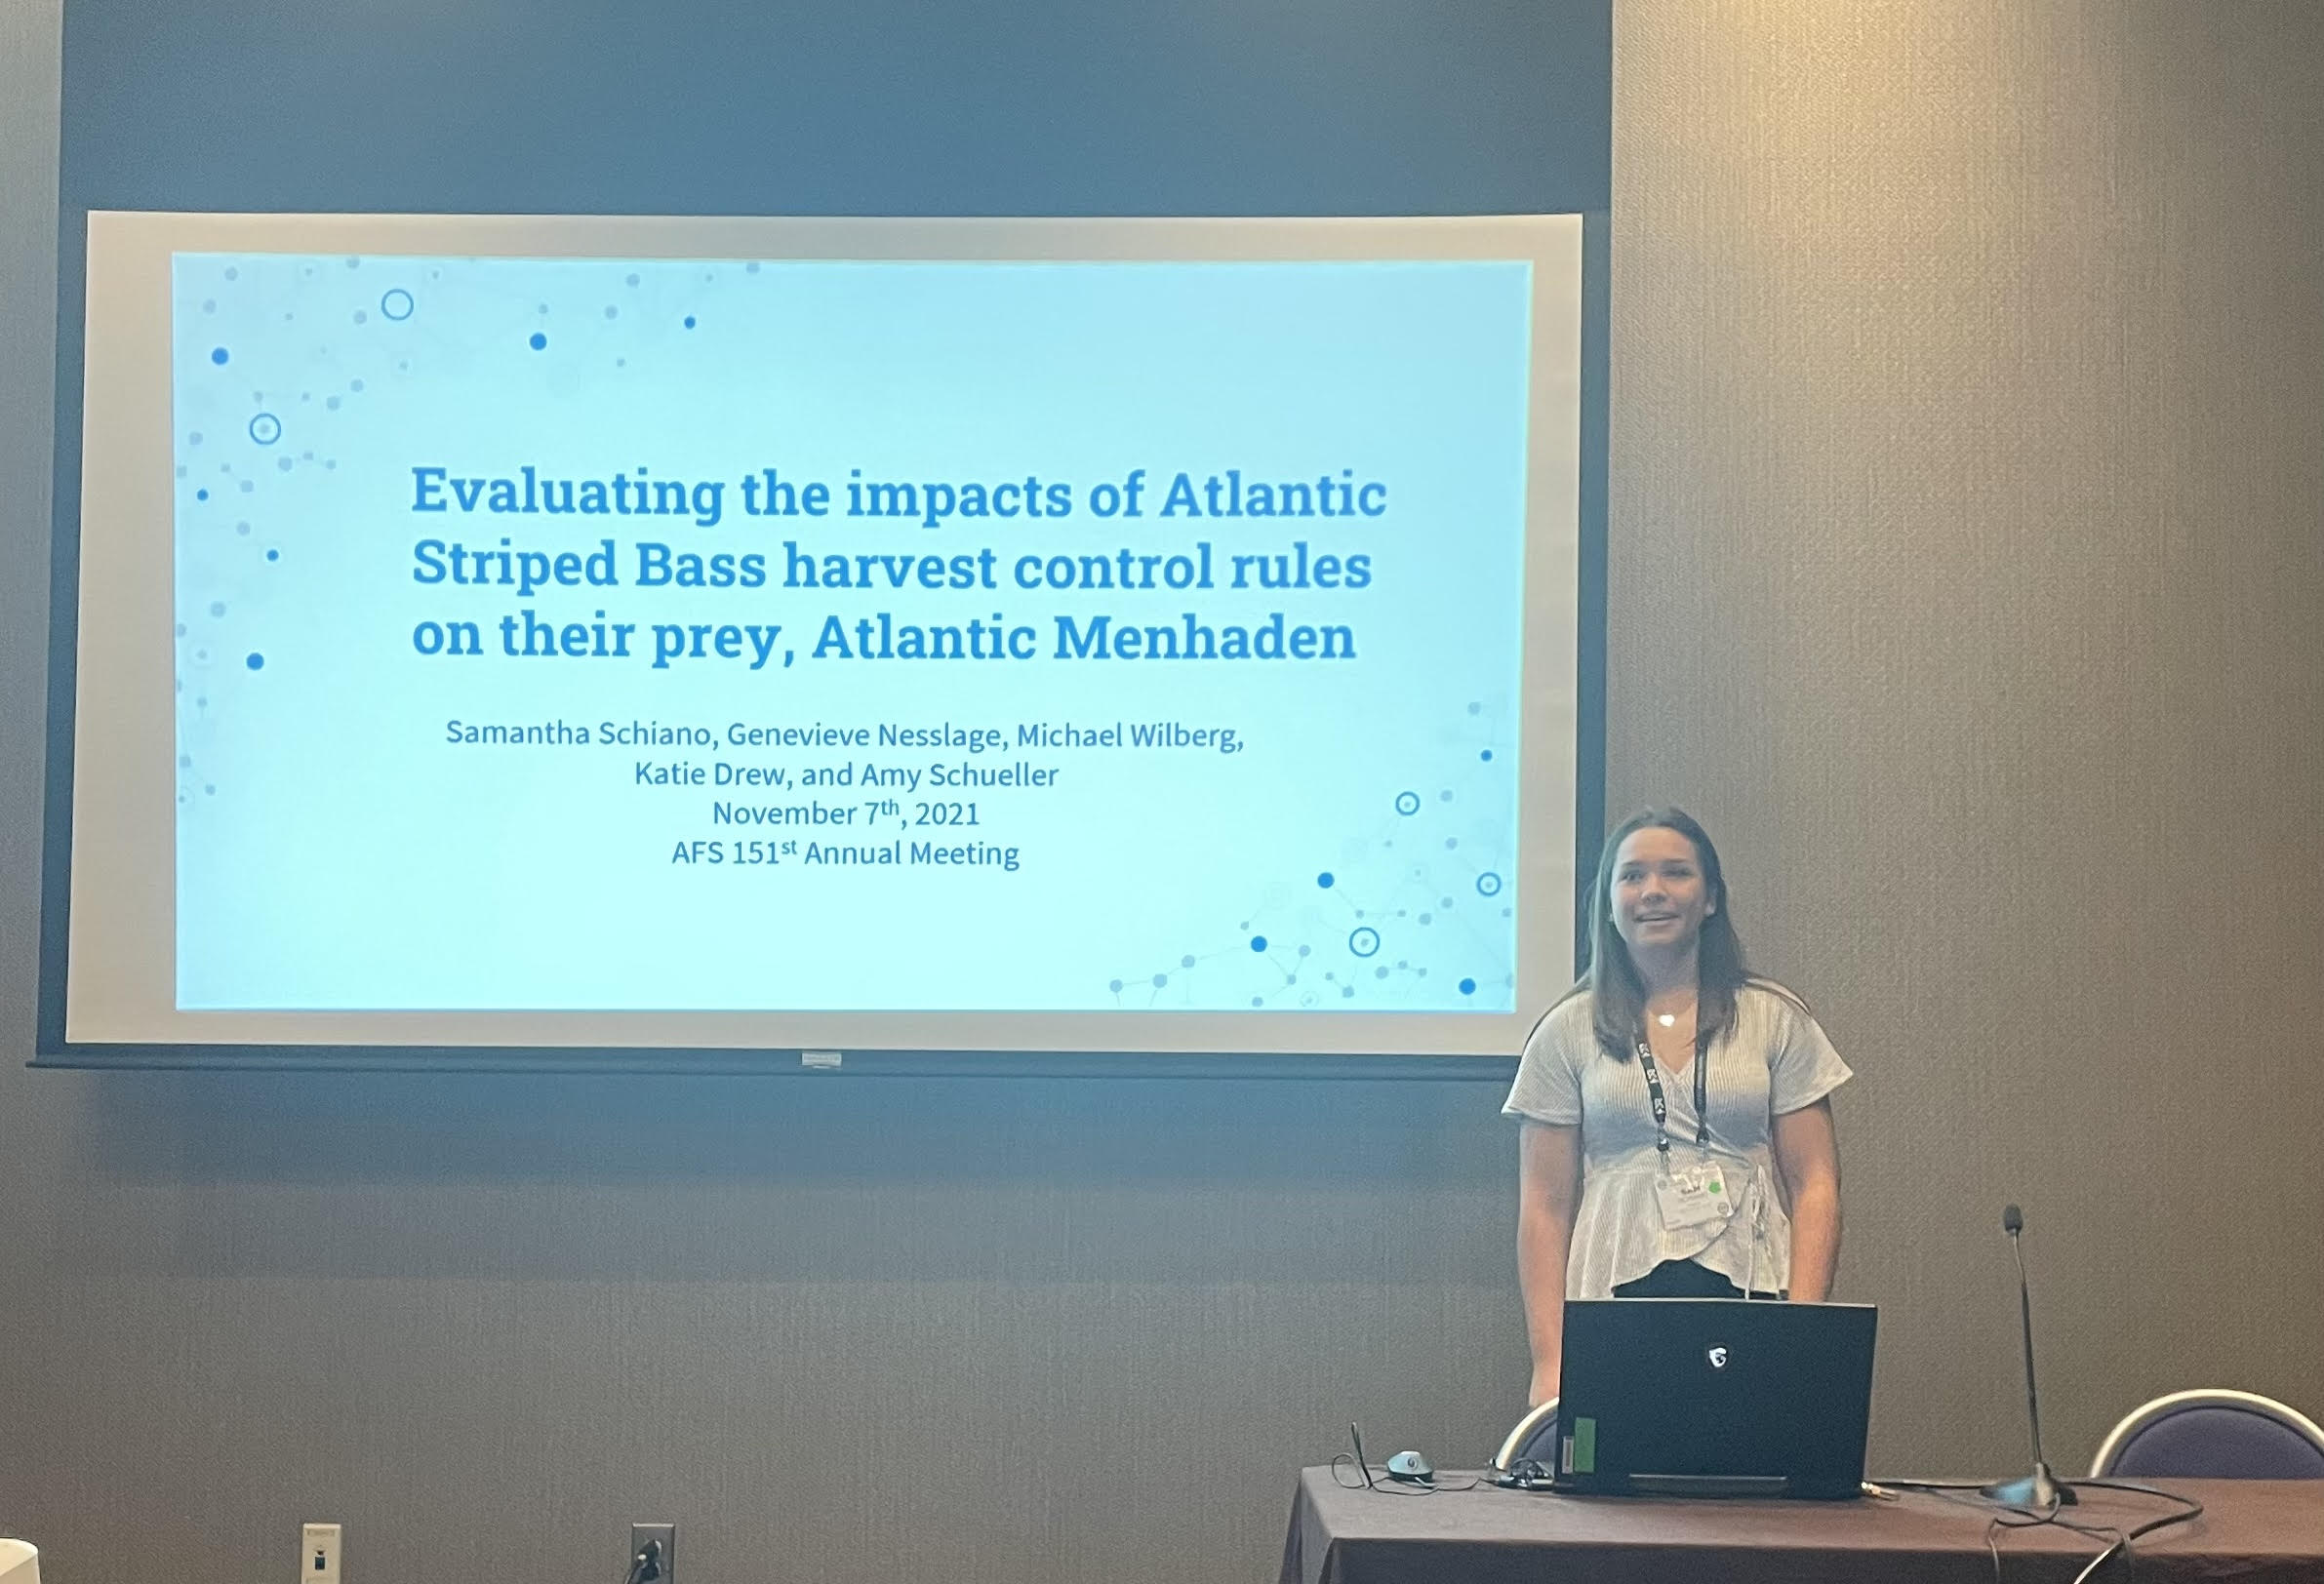 The moment I began my talk at the AFS conference. It was only smiles from here—I memorized my talk and was quick on my feet responding to numerous questions at the end. Credit: Samantha Schiano